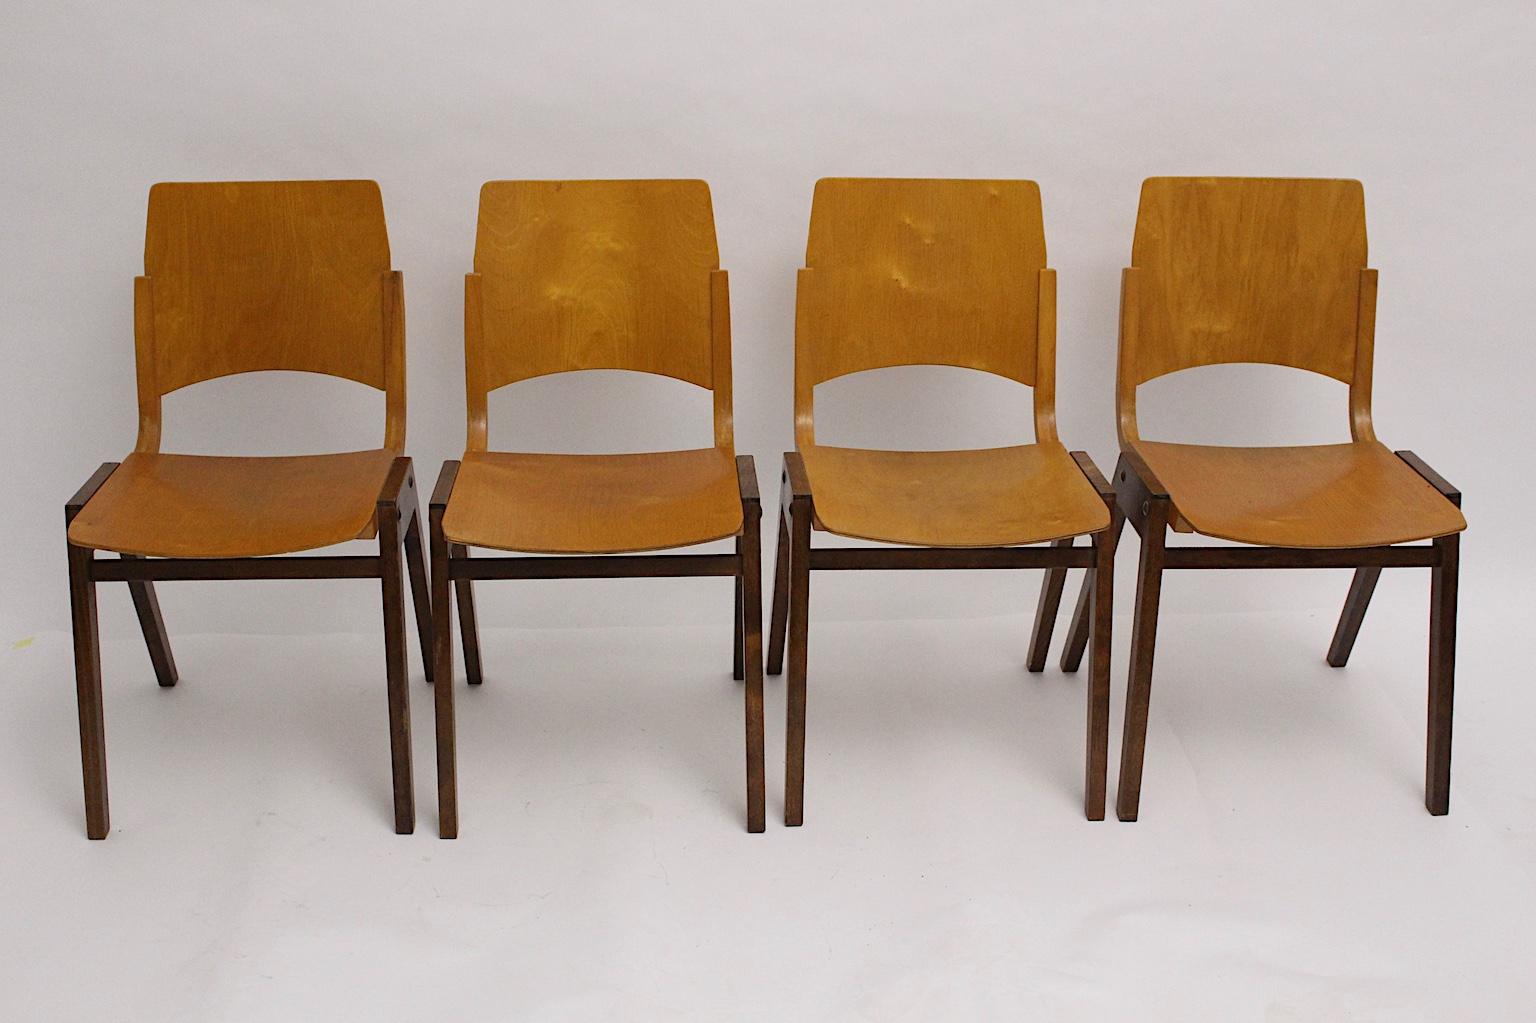 Mid Century Modern set of 4 vintage beech bicolor dining chairs model P 7 by Roland Rainer designed for the Viennese Stadthalle 1952. The dining chairs are also stackable. Executed by Emil & Alfred Pollak.
Furthermore the chairs consist of brown